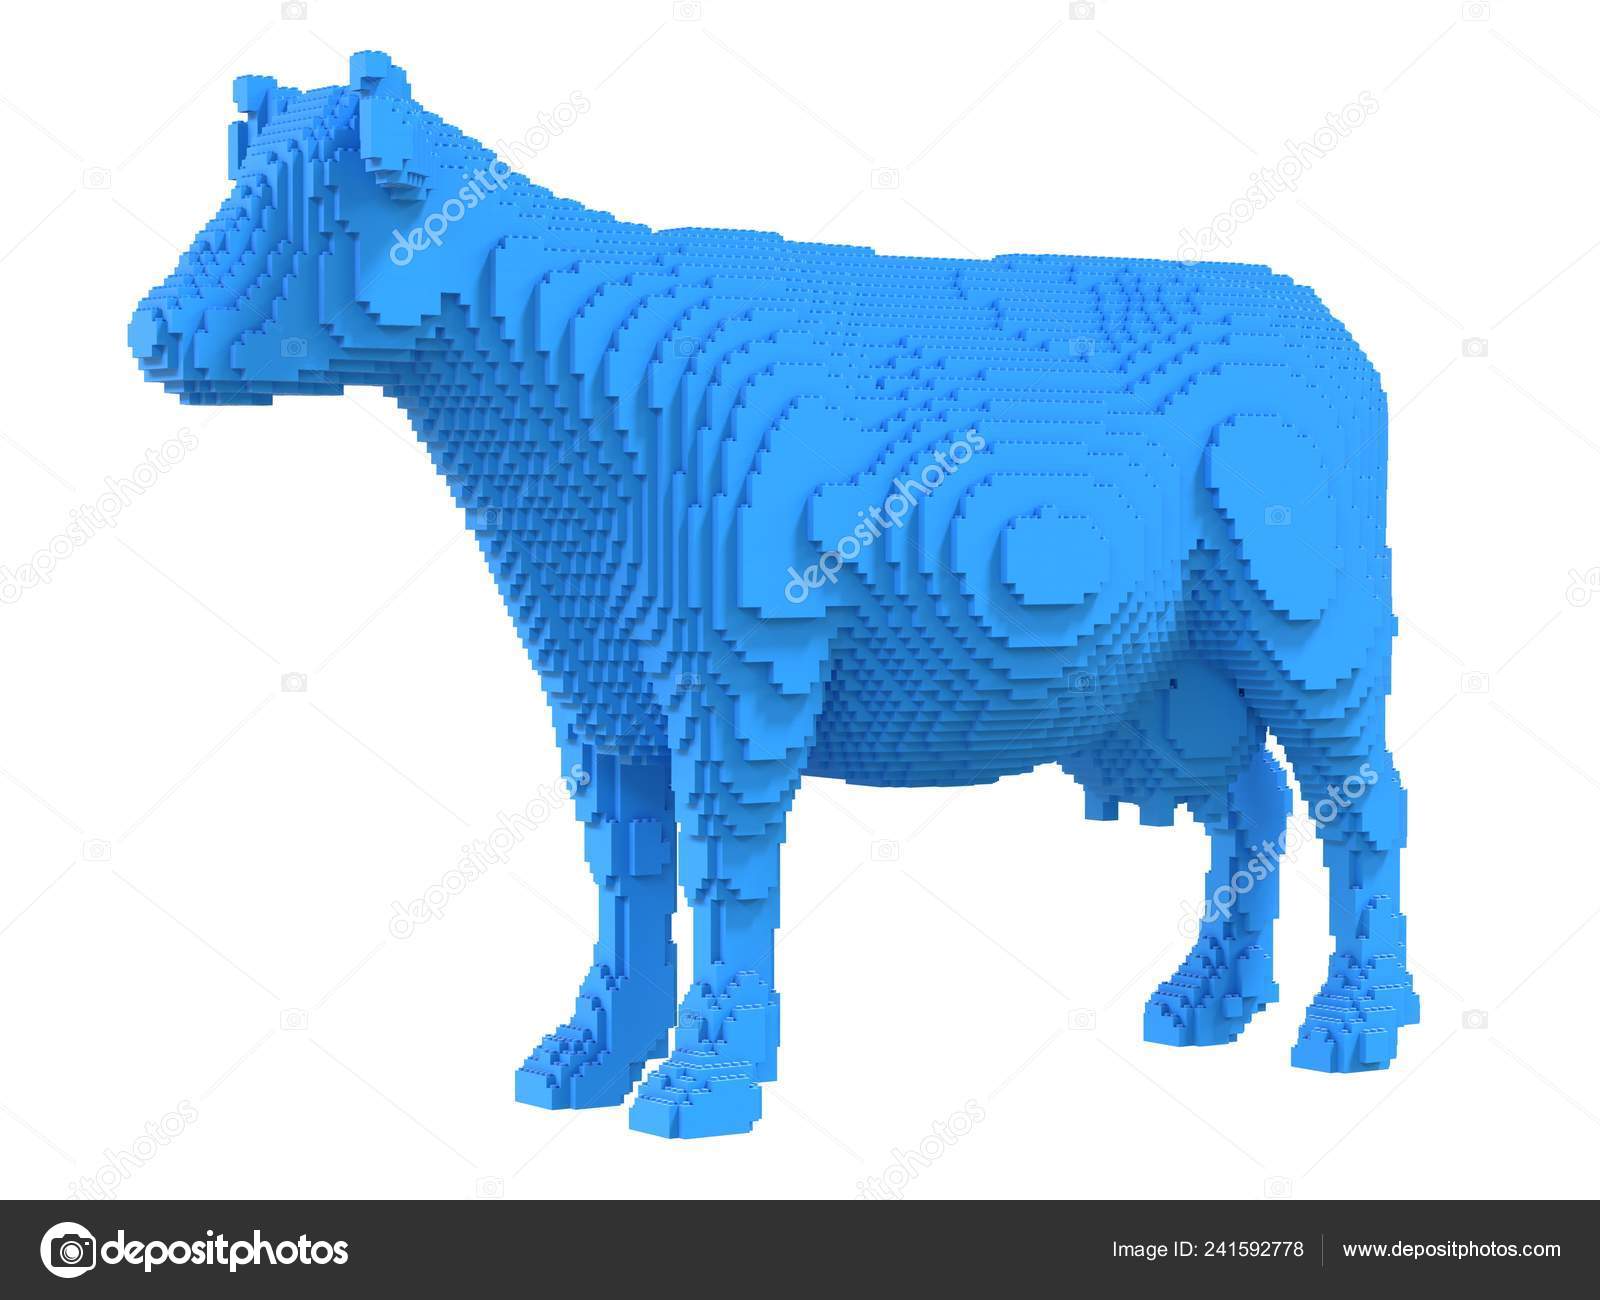 blue cow toy